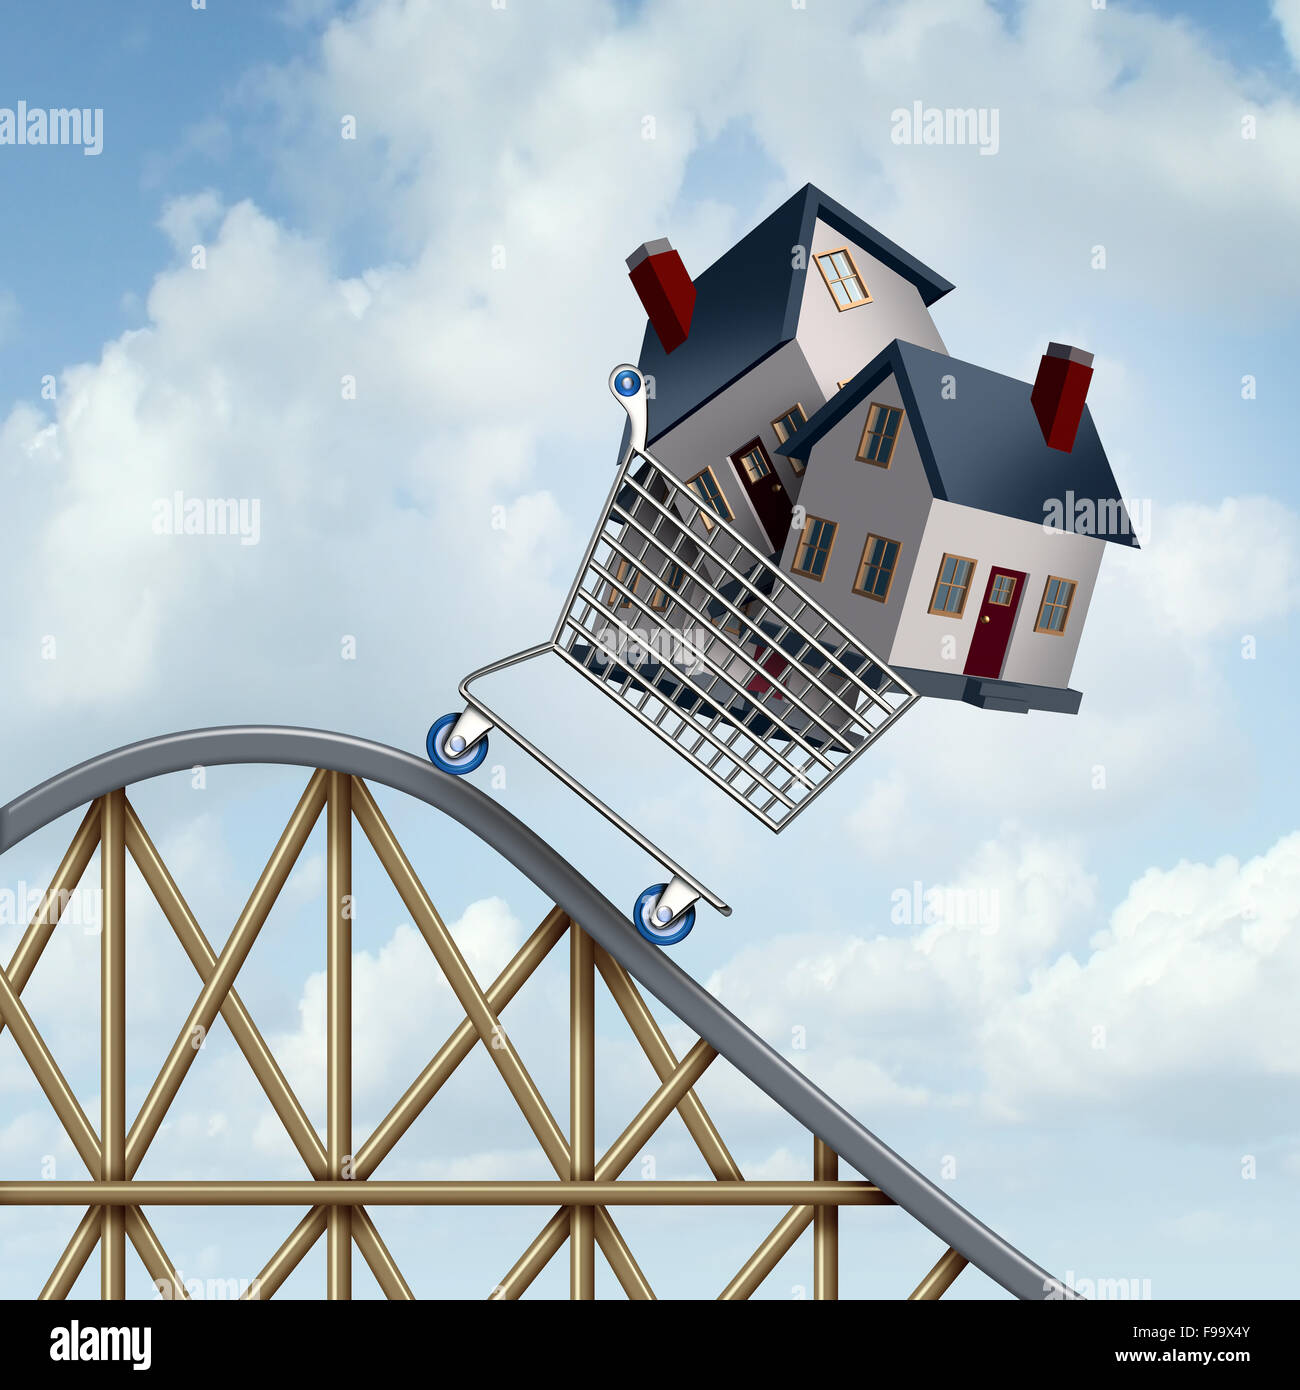 Falling home prices and declining real estate value financial concept as sold houses in a shopping cart going down a roller coaster as a business financial concept as low or lower mortgage residential loan rates and buying your family dream home. Stock Photo